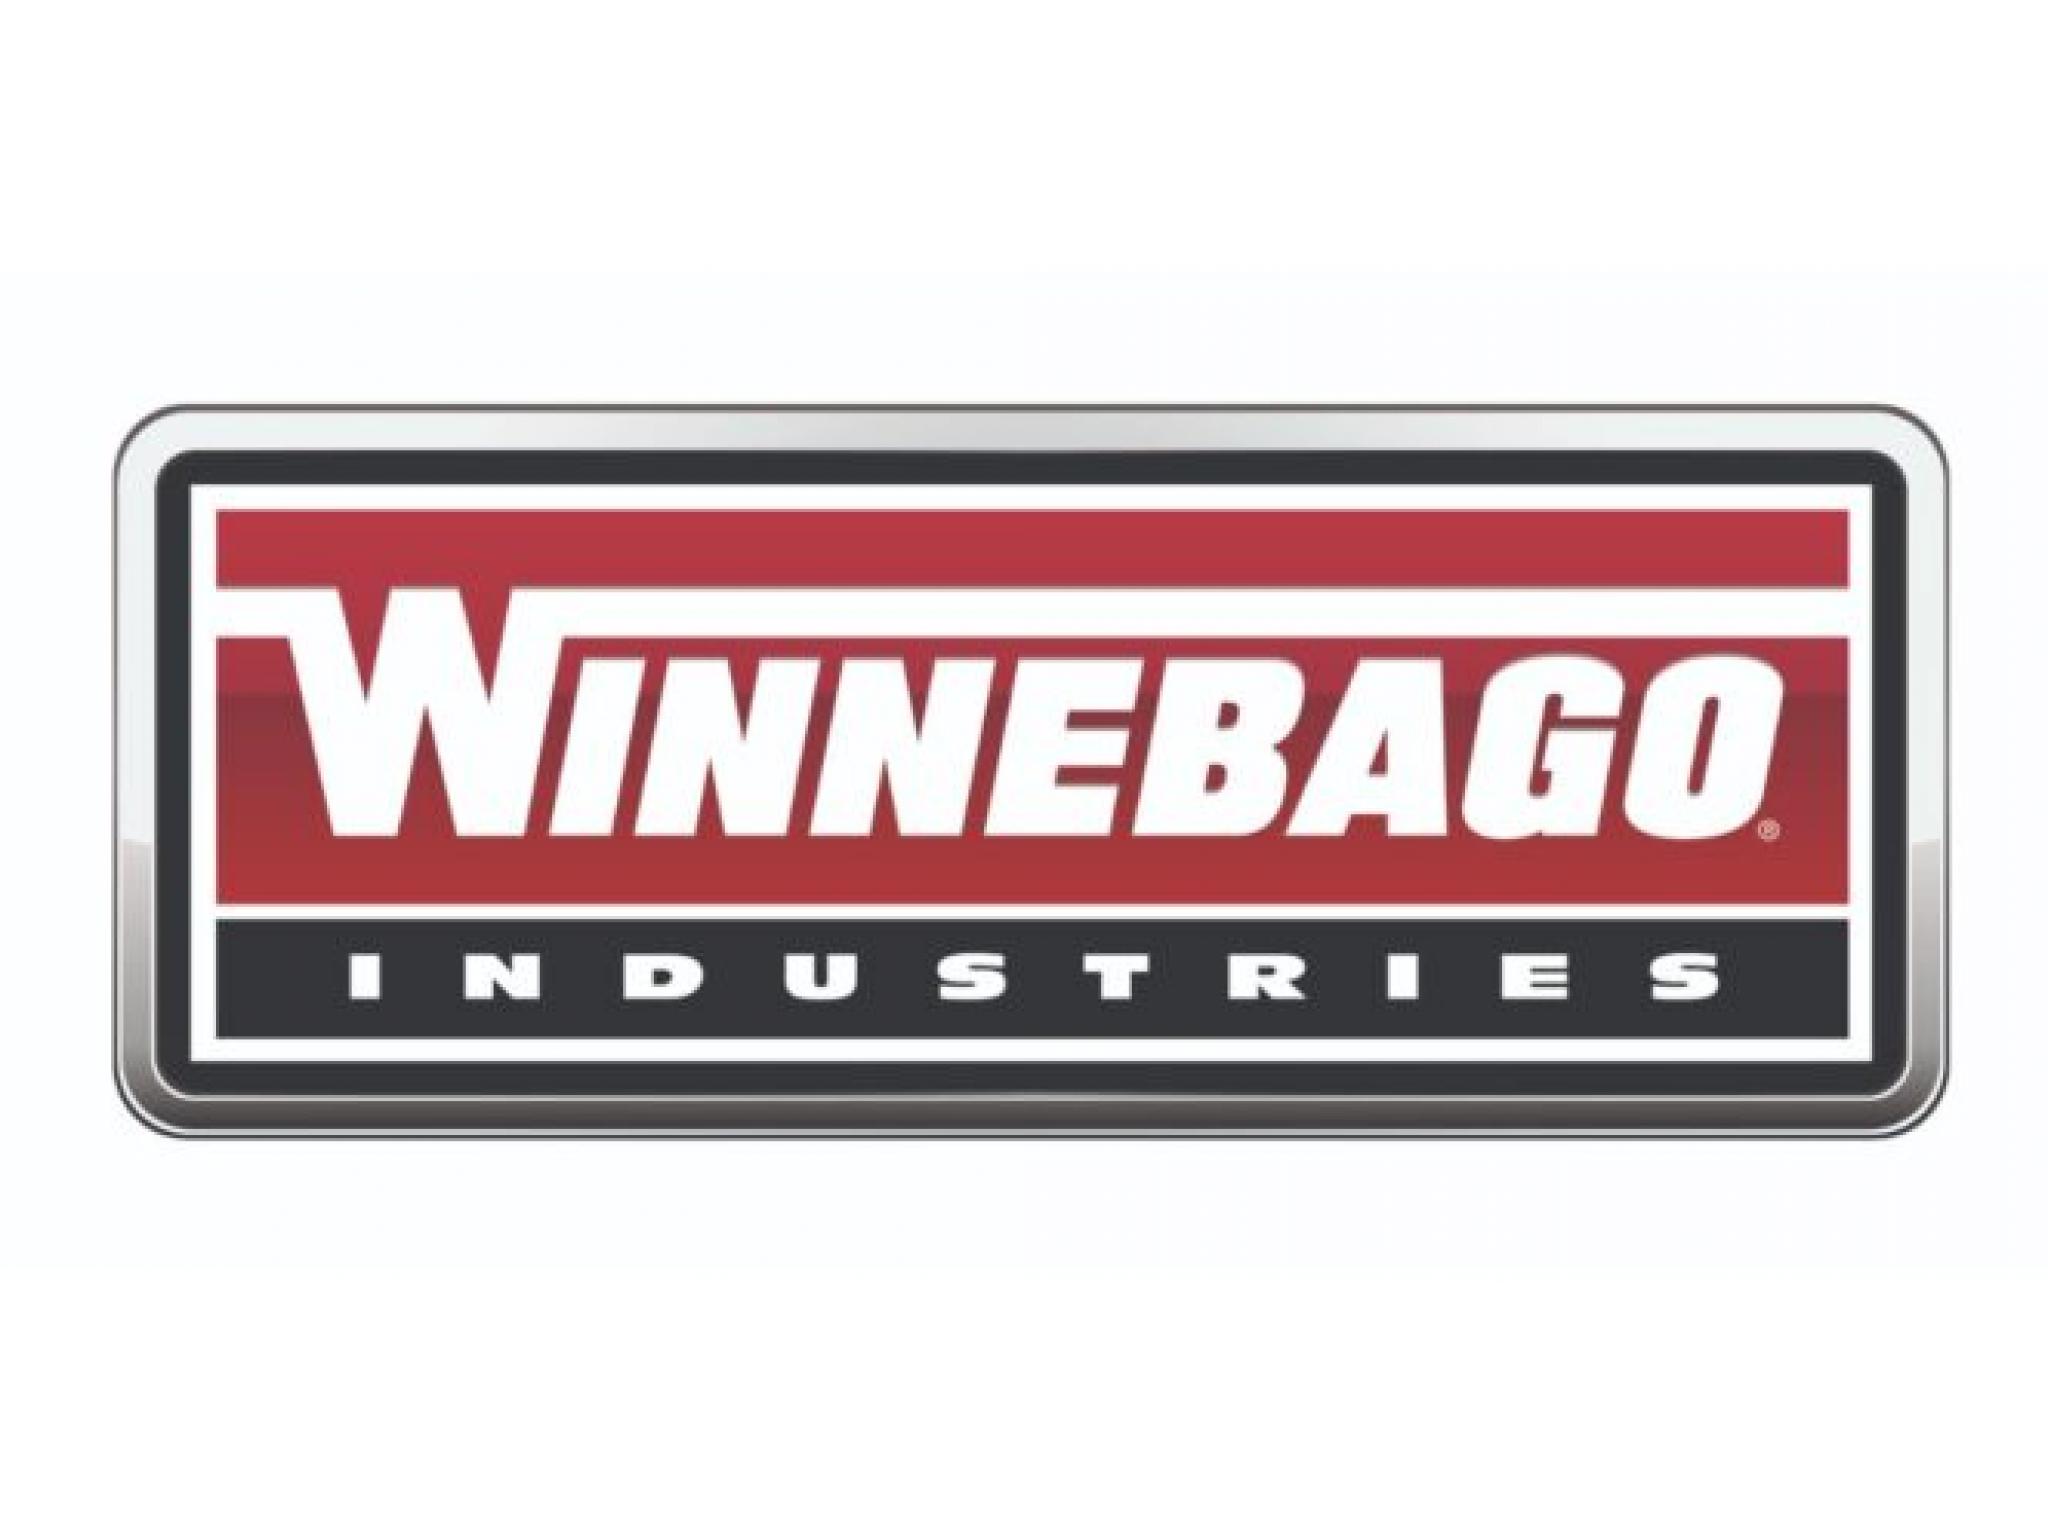  winnebago-analysts-cut-their-forecasts-after-q3-results 